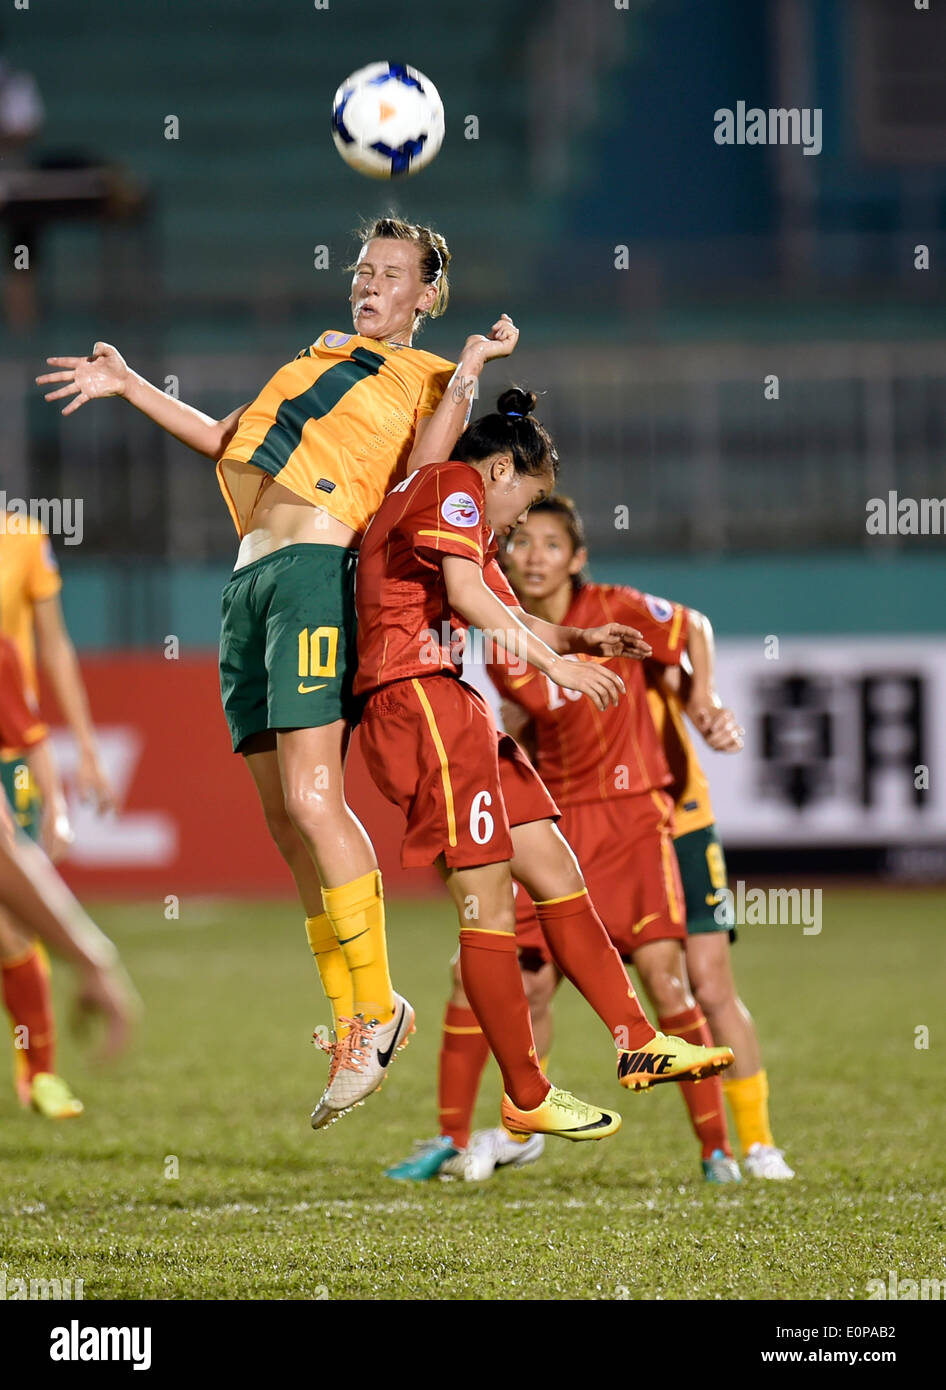 Ho Chi Minh, Vietnam. 18th May, 2014. Emilyvan Egmond (Top) of Australia vies for the ball during the Group A match against Vietnam at the 2014 Women's AFC Cup held at Thong Nhat Stadium in Ho Chi Minh city, Vietnam, May 18, 2014. Australia beat Vietnam 2-0. © He Jingjia/Xinhua/Alamy Live News Stock Photo